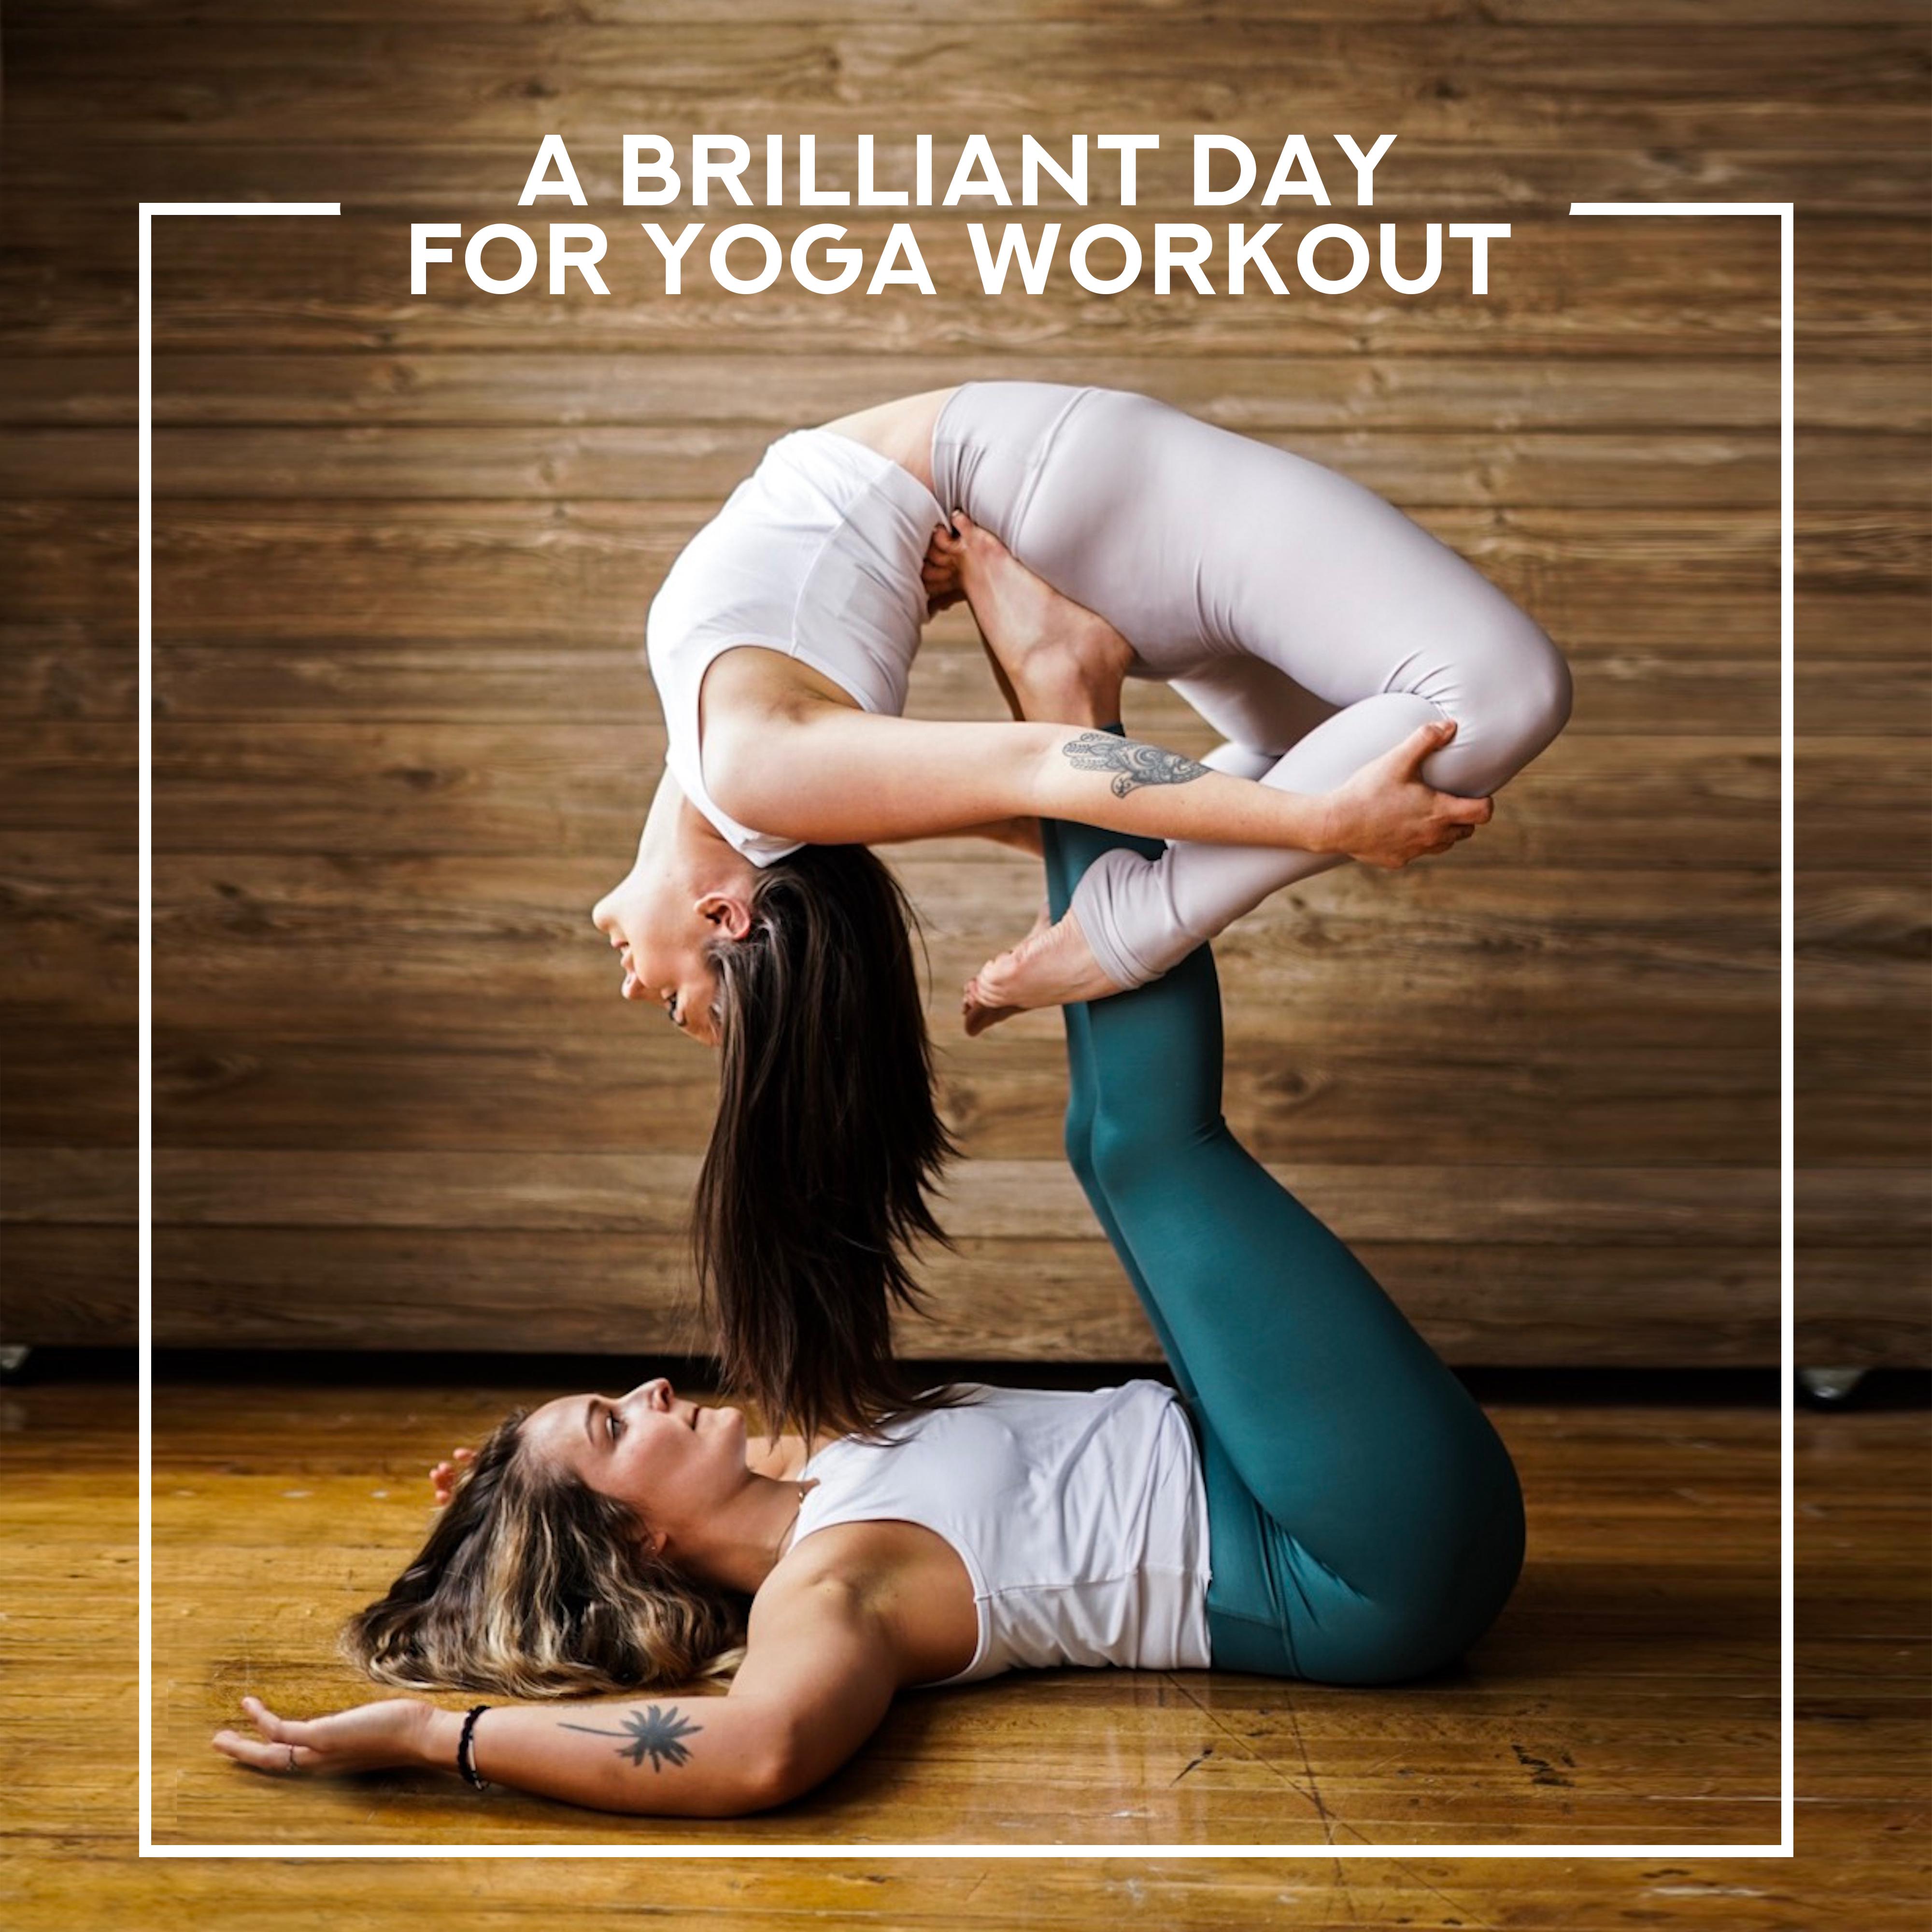 A Brilliant Day for Yoga Workout: 15 New Age Songs for Meditation & Deep Relaxation